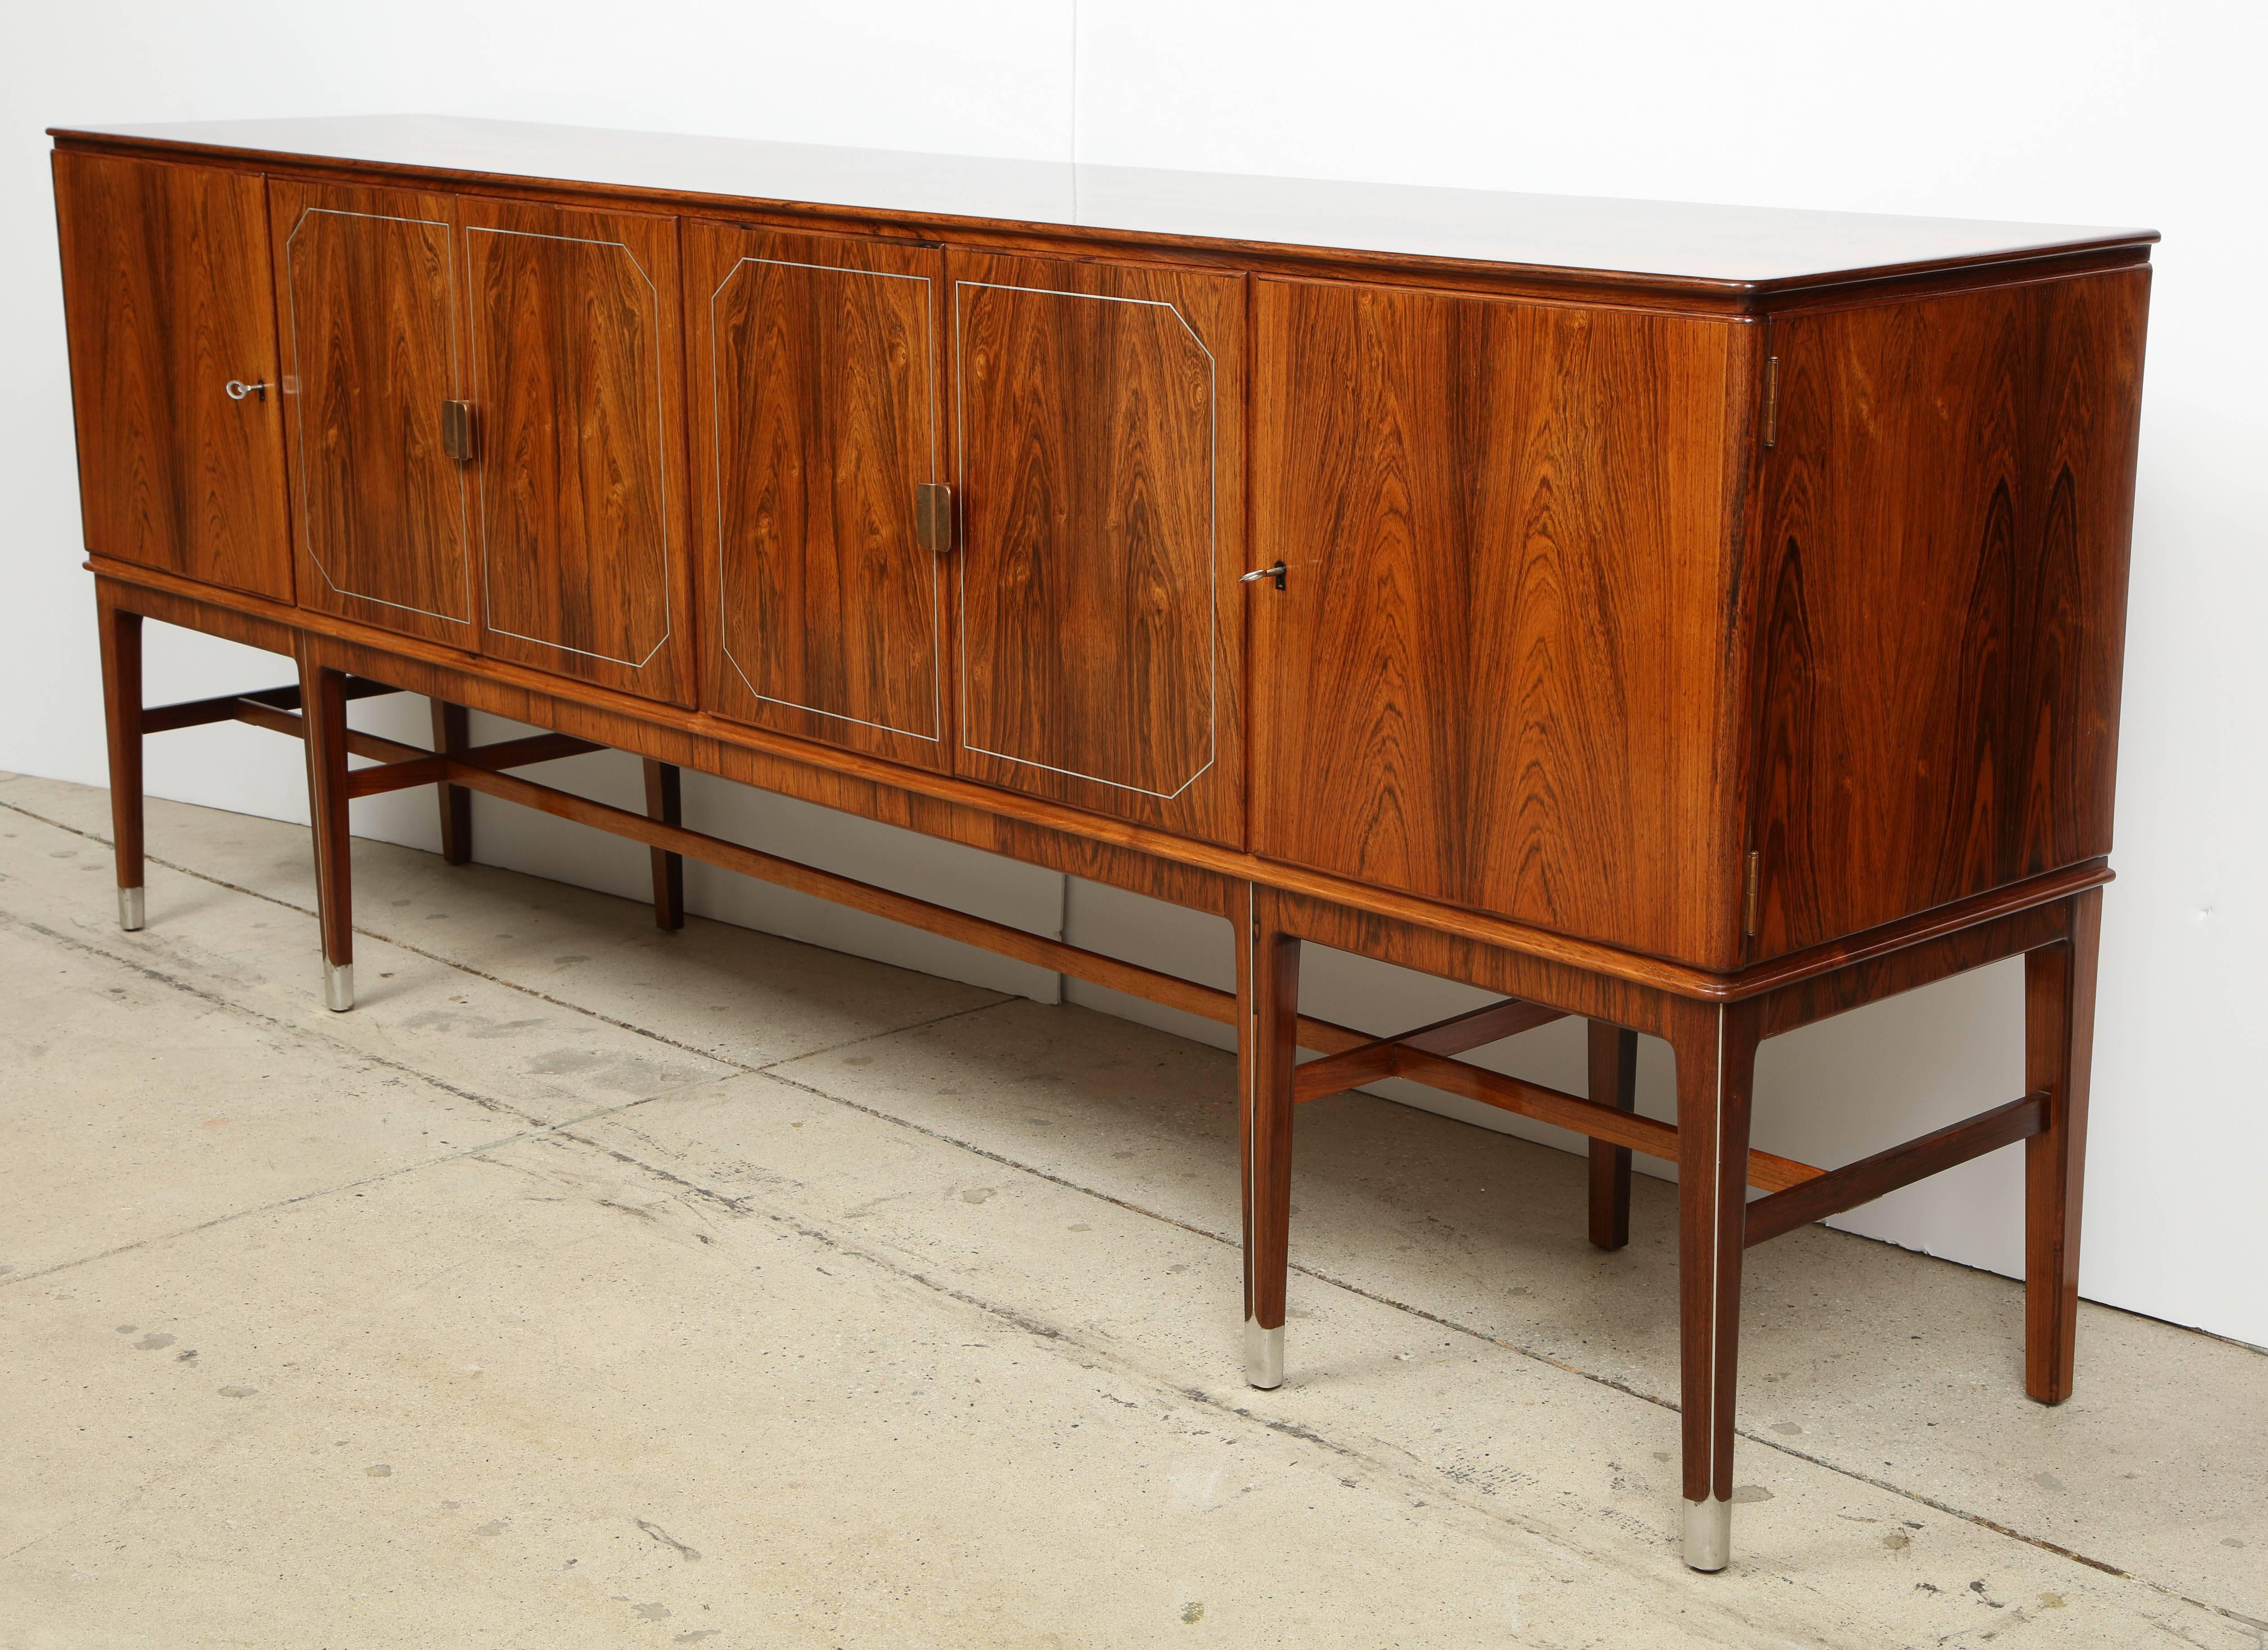 A superb Danish sideboard in Brazilian rosewood with white metal inlays (probably pewter) designed by Agner Christoffersen and produced by N.C Christoffersen, circa 1950s, six cabinet doors with patinated copper pulls opening to a fitted interior